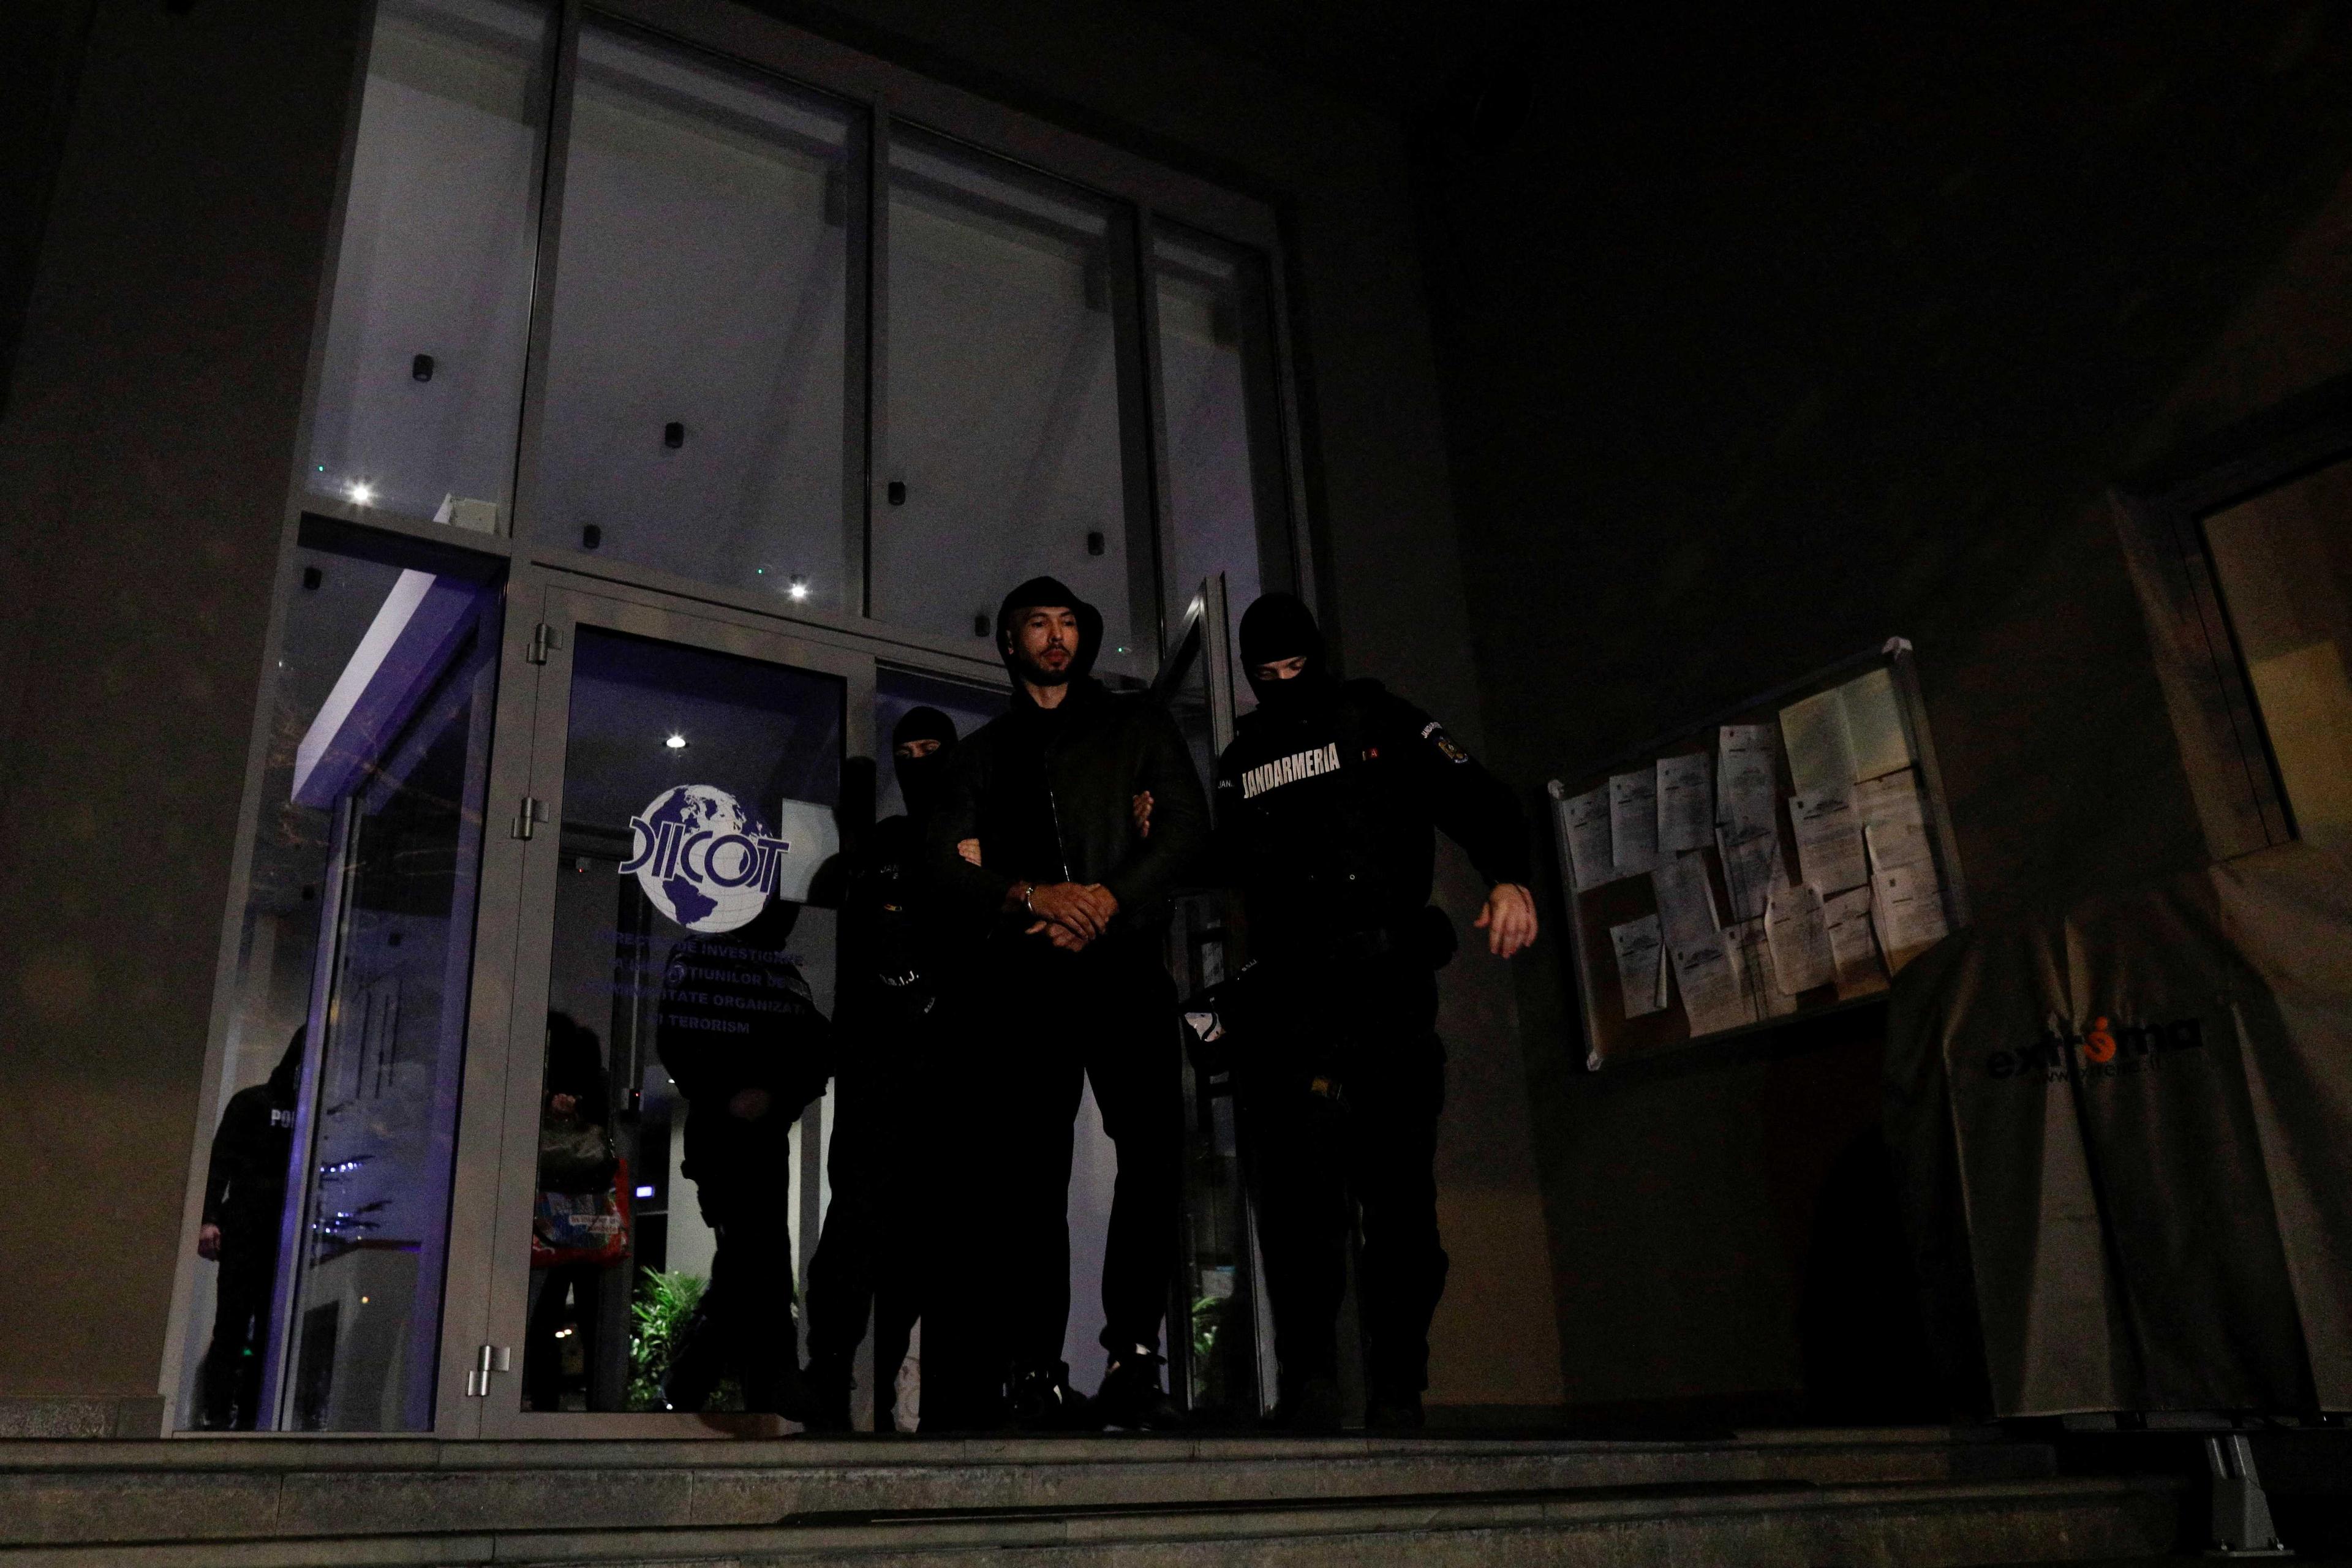 Andrew Tate and Tristan Tate (not pictured) are escorted by police officers outside the headquarters of the Directorate for Investigating Organized Crime and Terrorism in Bucharest after being detained for 24 hours, in Bucharest, Romania, Dec 29, 2022. Photo: Reuters